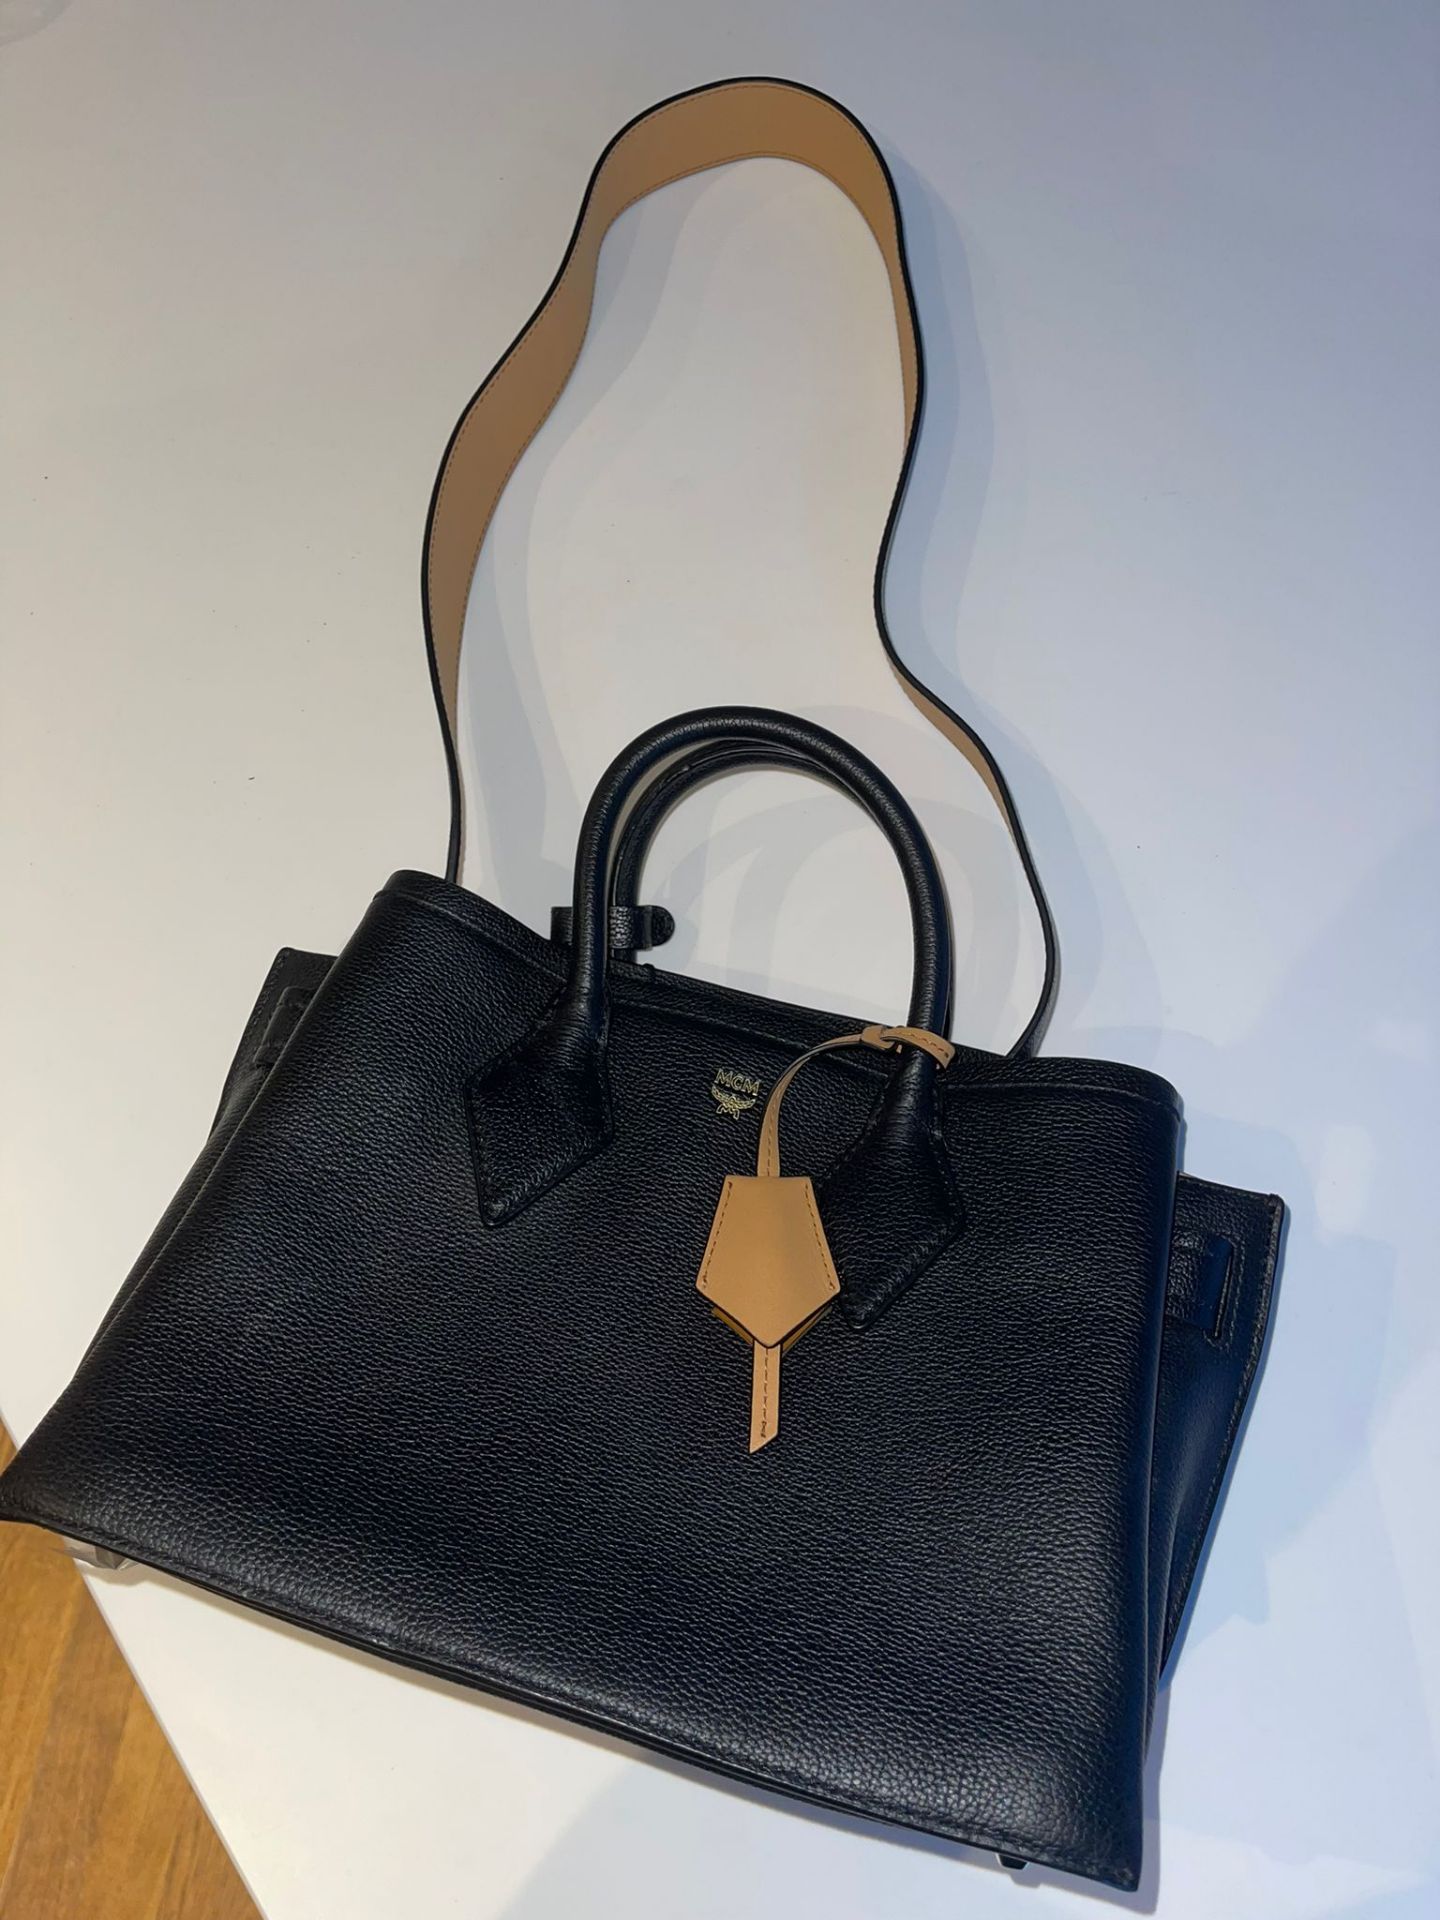 MCM Neo Milla Tote in Park Ave Leathe. RRP £895.00. Back by popular demand, we have rejuvenated - Image 2 of 5